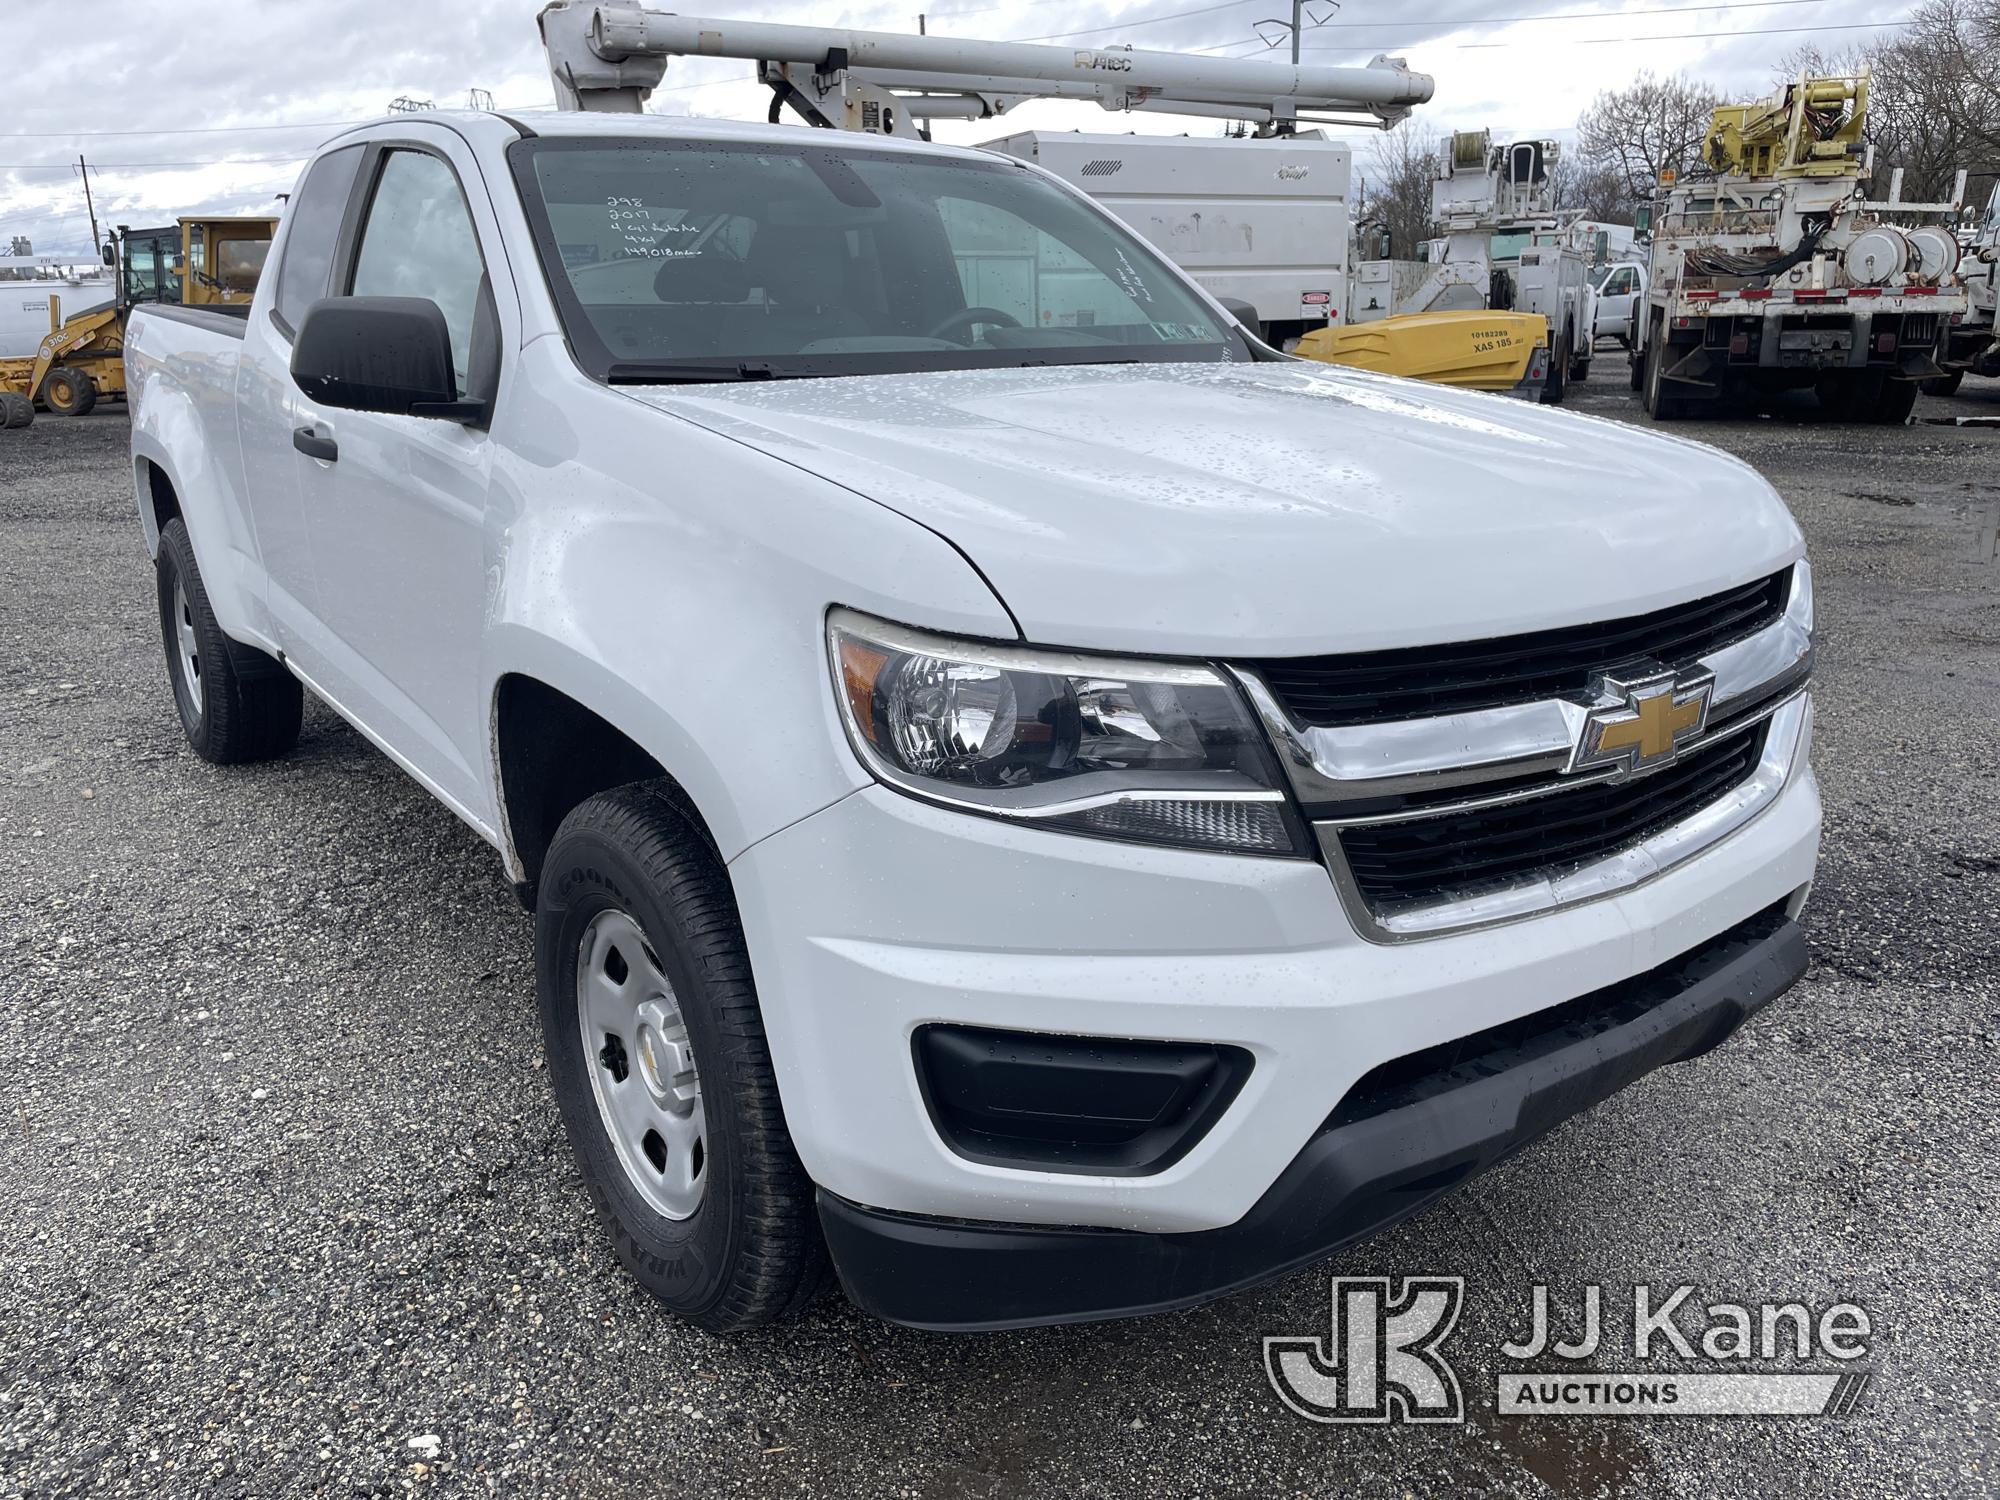 (Plymouth Meeting, PA) 2017 Chevrolet Colorado 4x4 Extended-Cab Pickup Truck Runs & Moves, Minor Bod